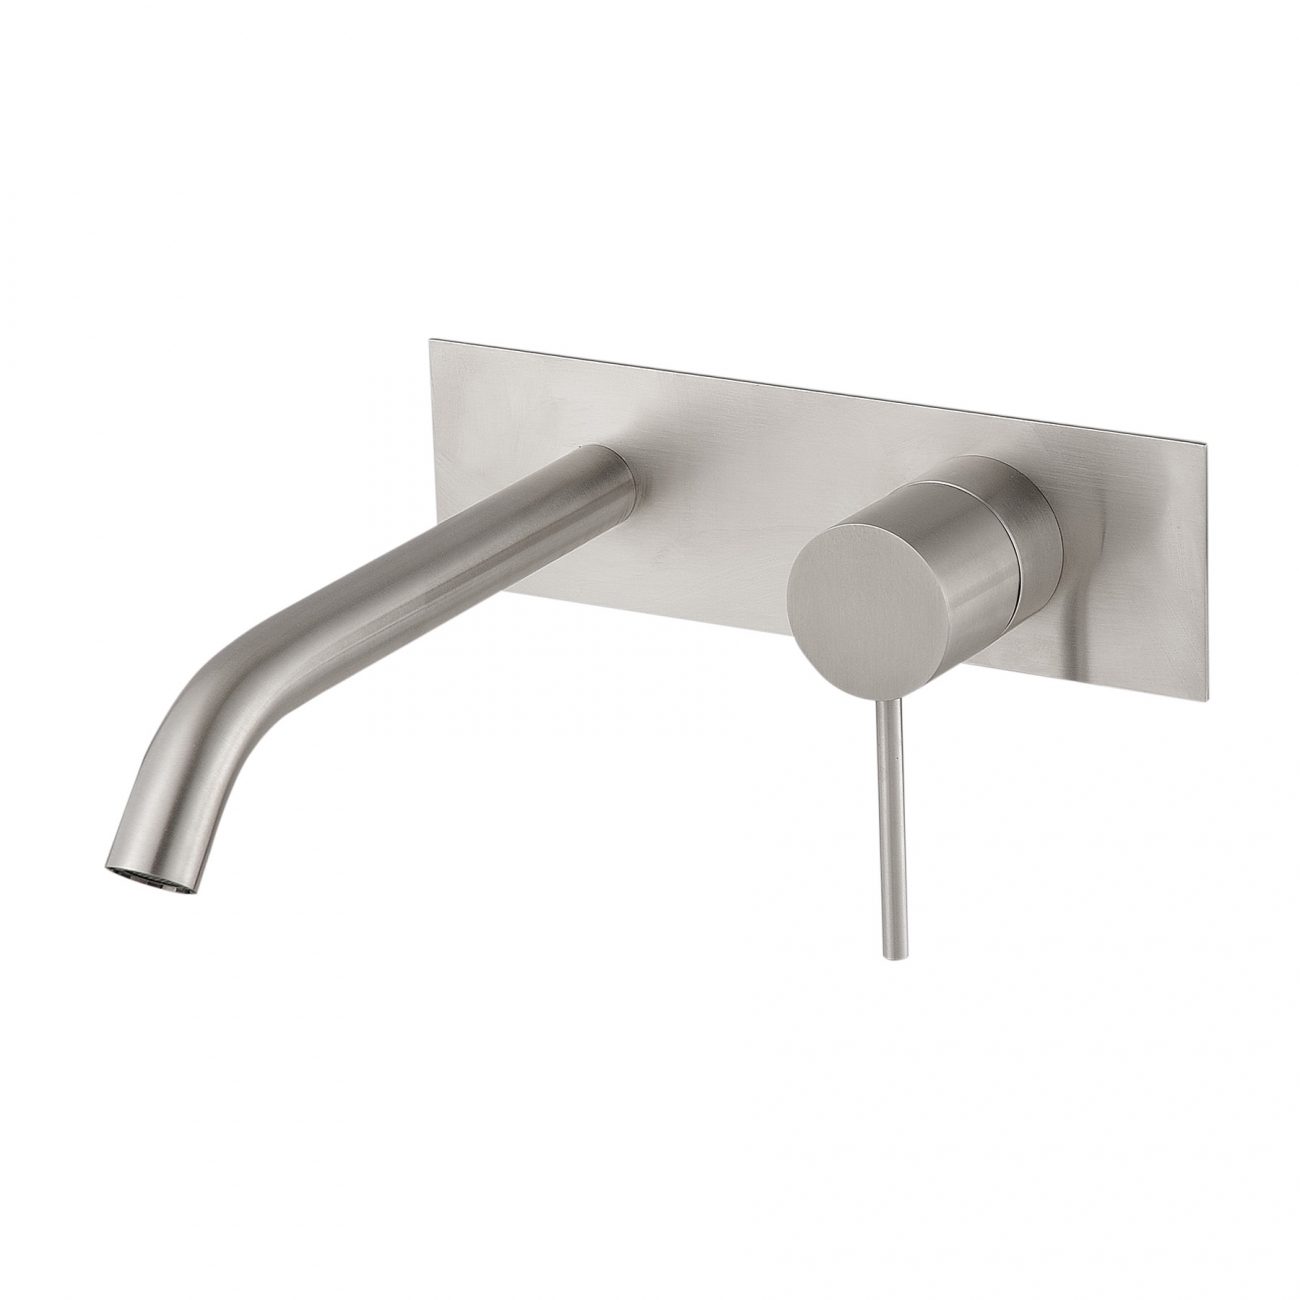 Treemme 40mm wall-mounted basin mix